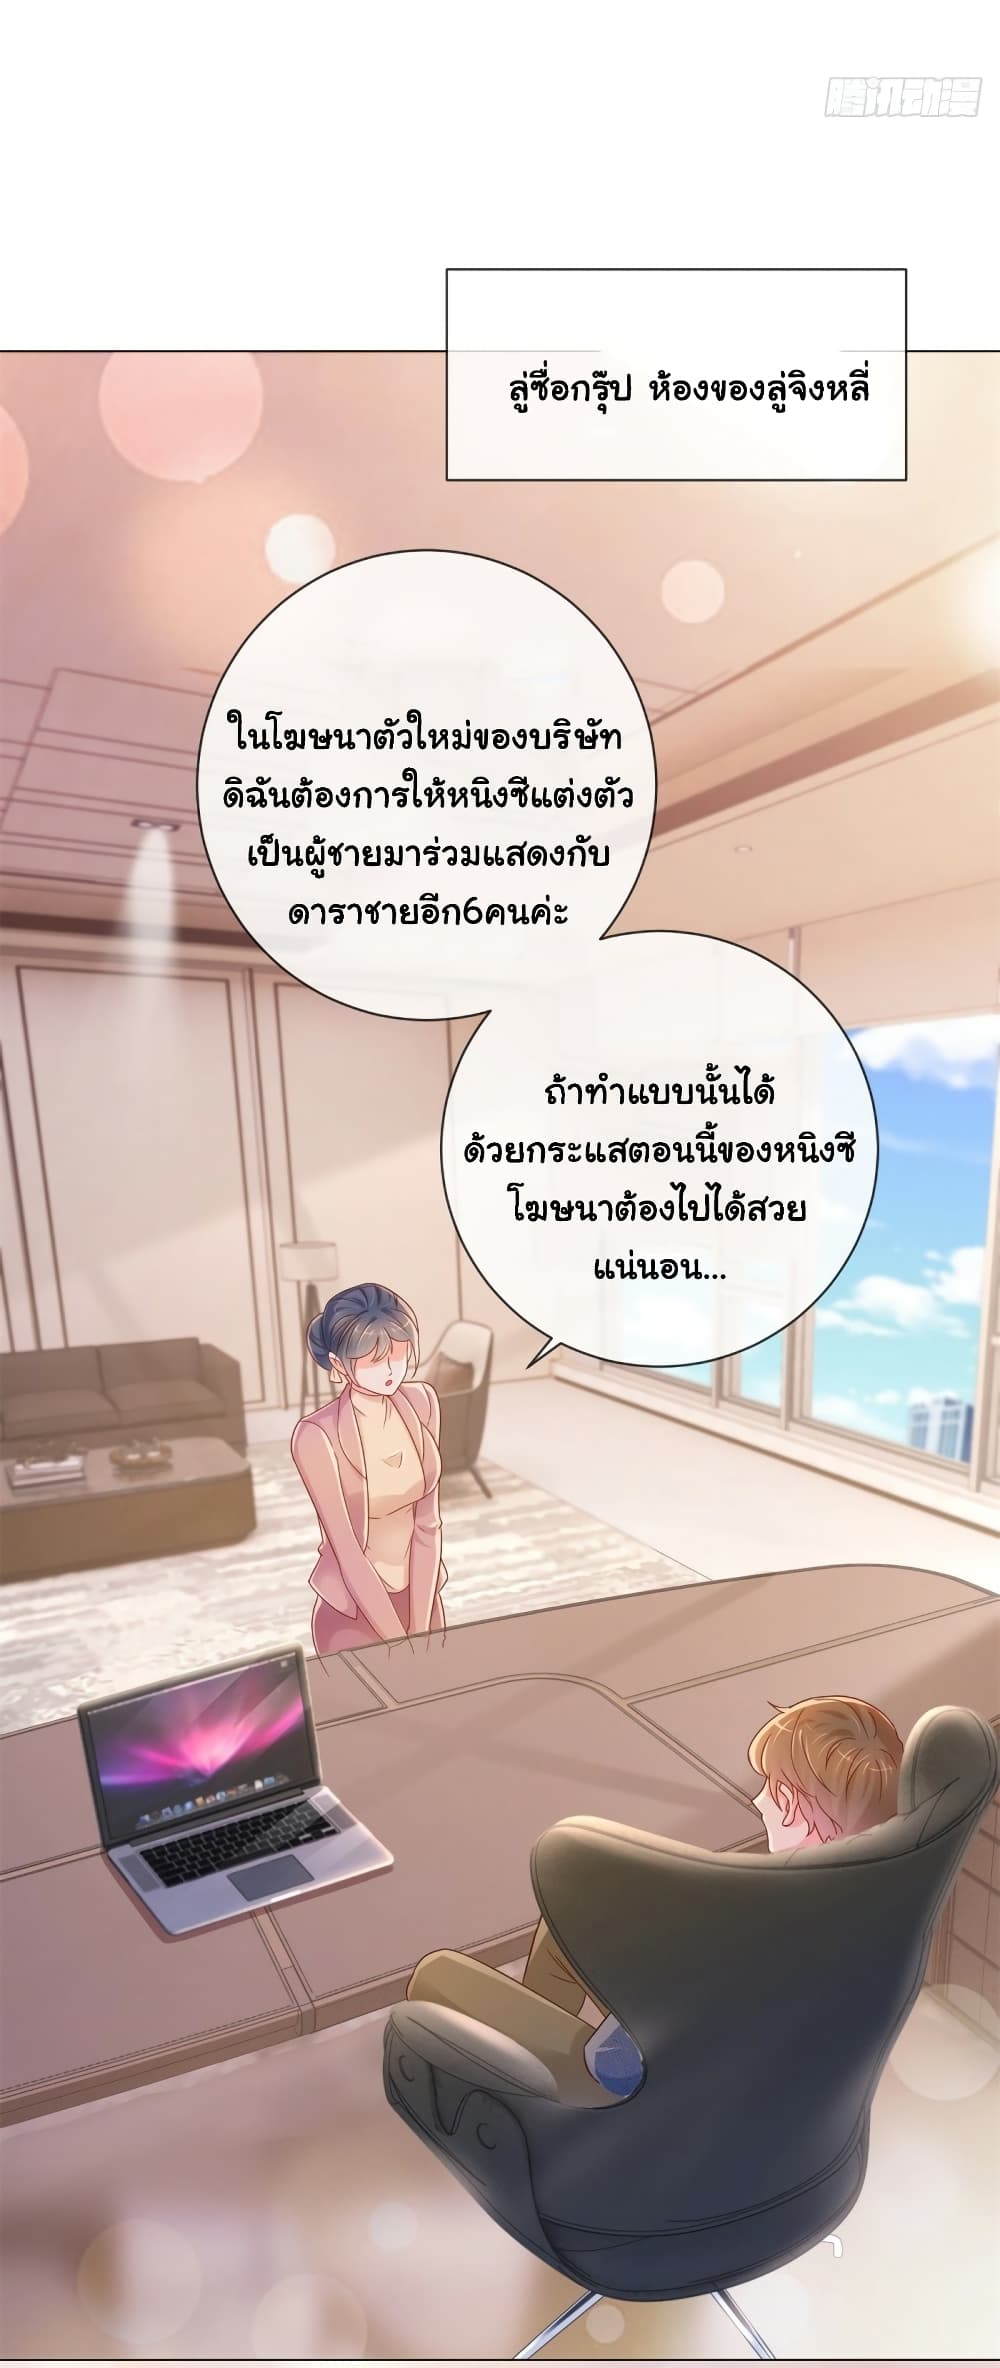 The Lovely Wife And Strange Marriage à¹à¸œà¸™à¸£à¸±à¸à¸¥à¸§à¸‡à¹ƒà¸ˆ 322 (18)